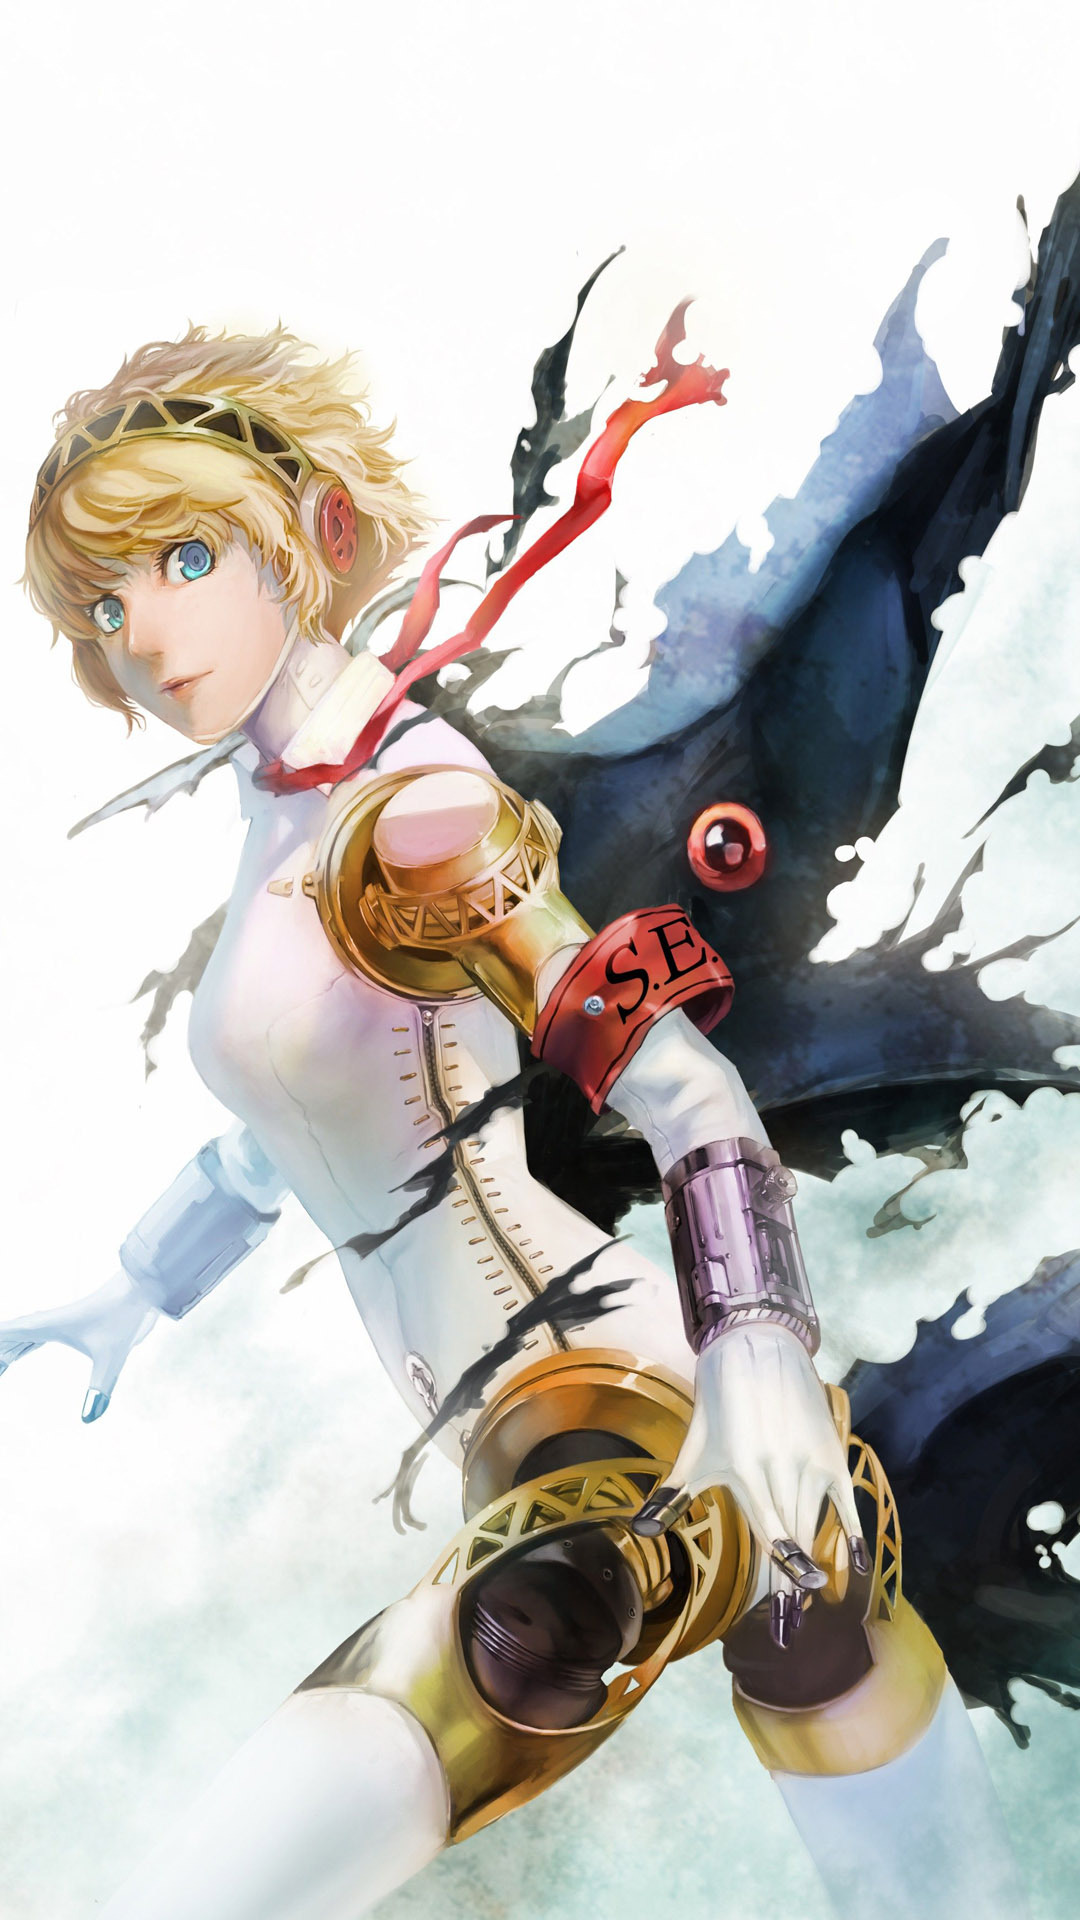 Free Download Aigis Persona 3 Mobile Wallpaper 1080x19 For Your Desktop Mobile Tablet Explore 42 Persona 3 Aigis Wallpaper Persona 3 Aigis Wallpaper Aigis Persona 3 Wallpaper Persona 3 Wallpapers